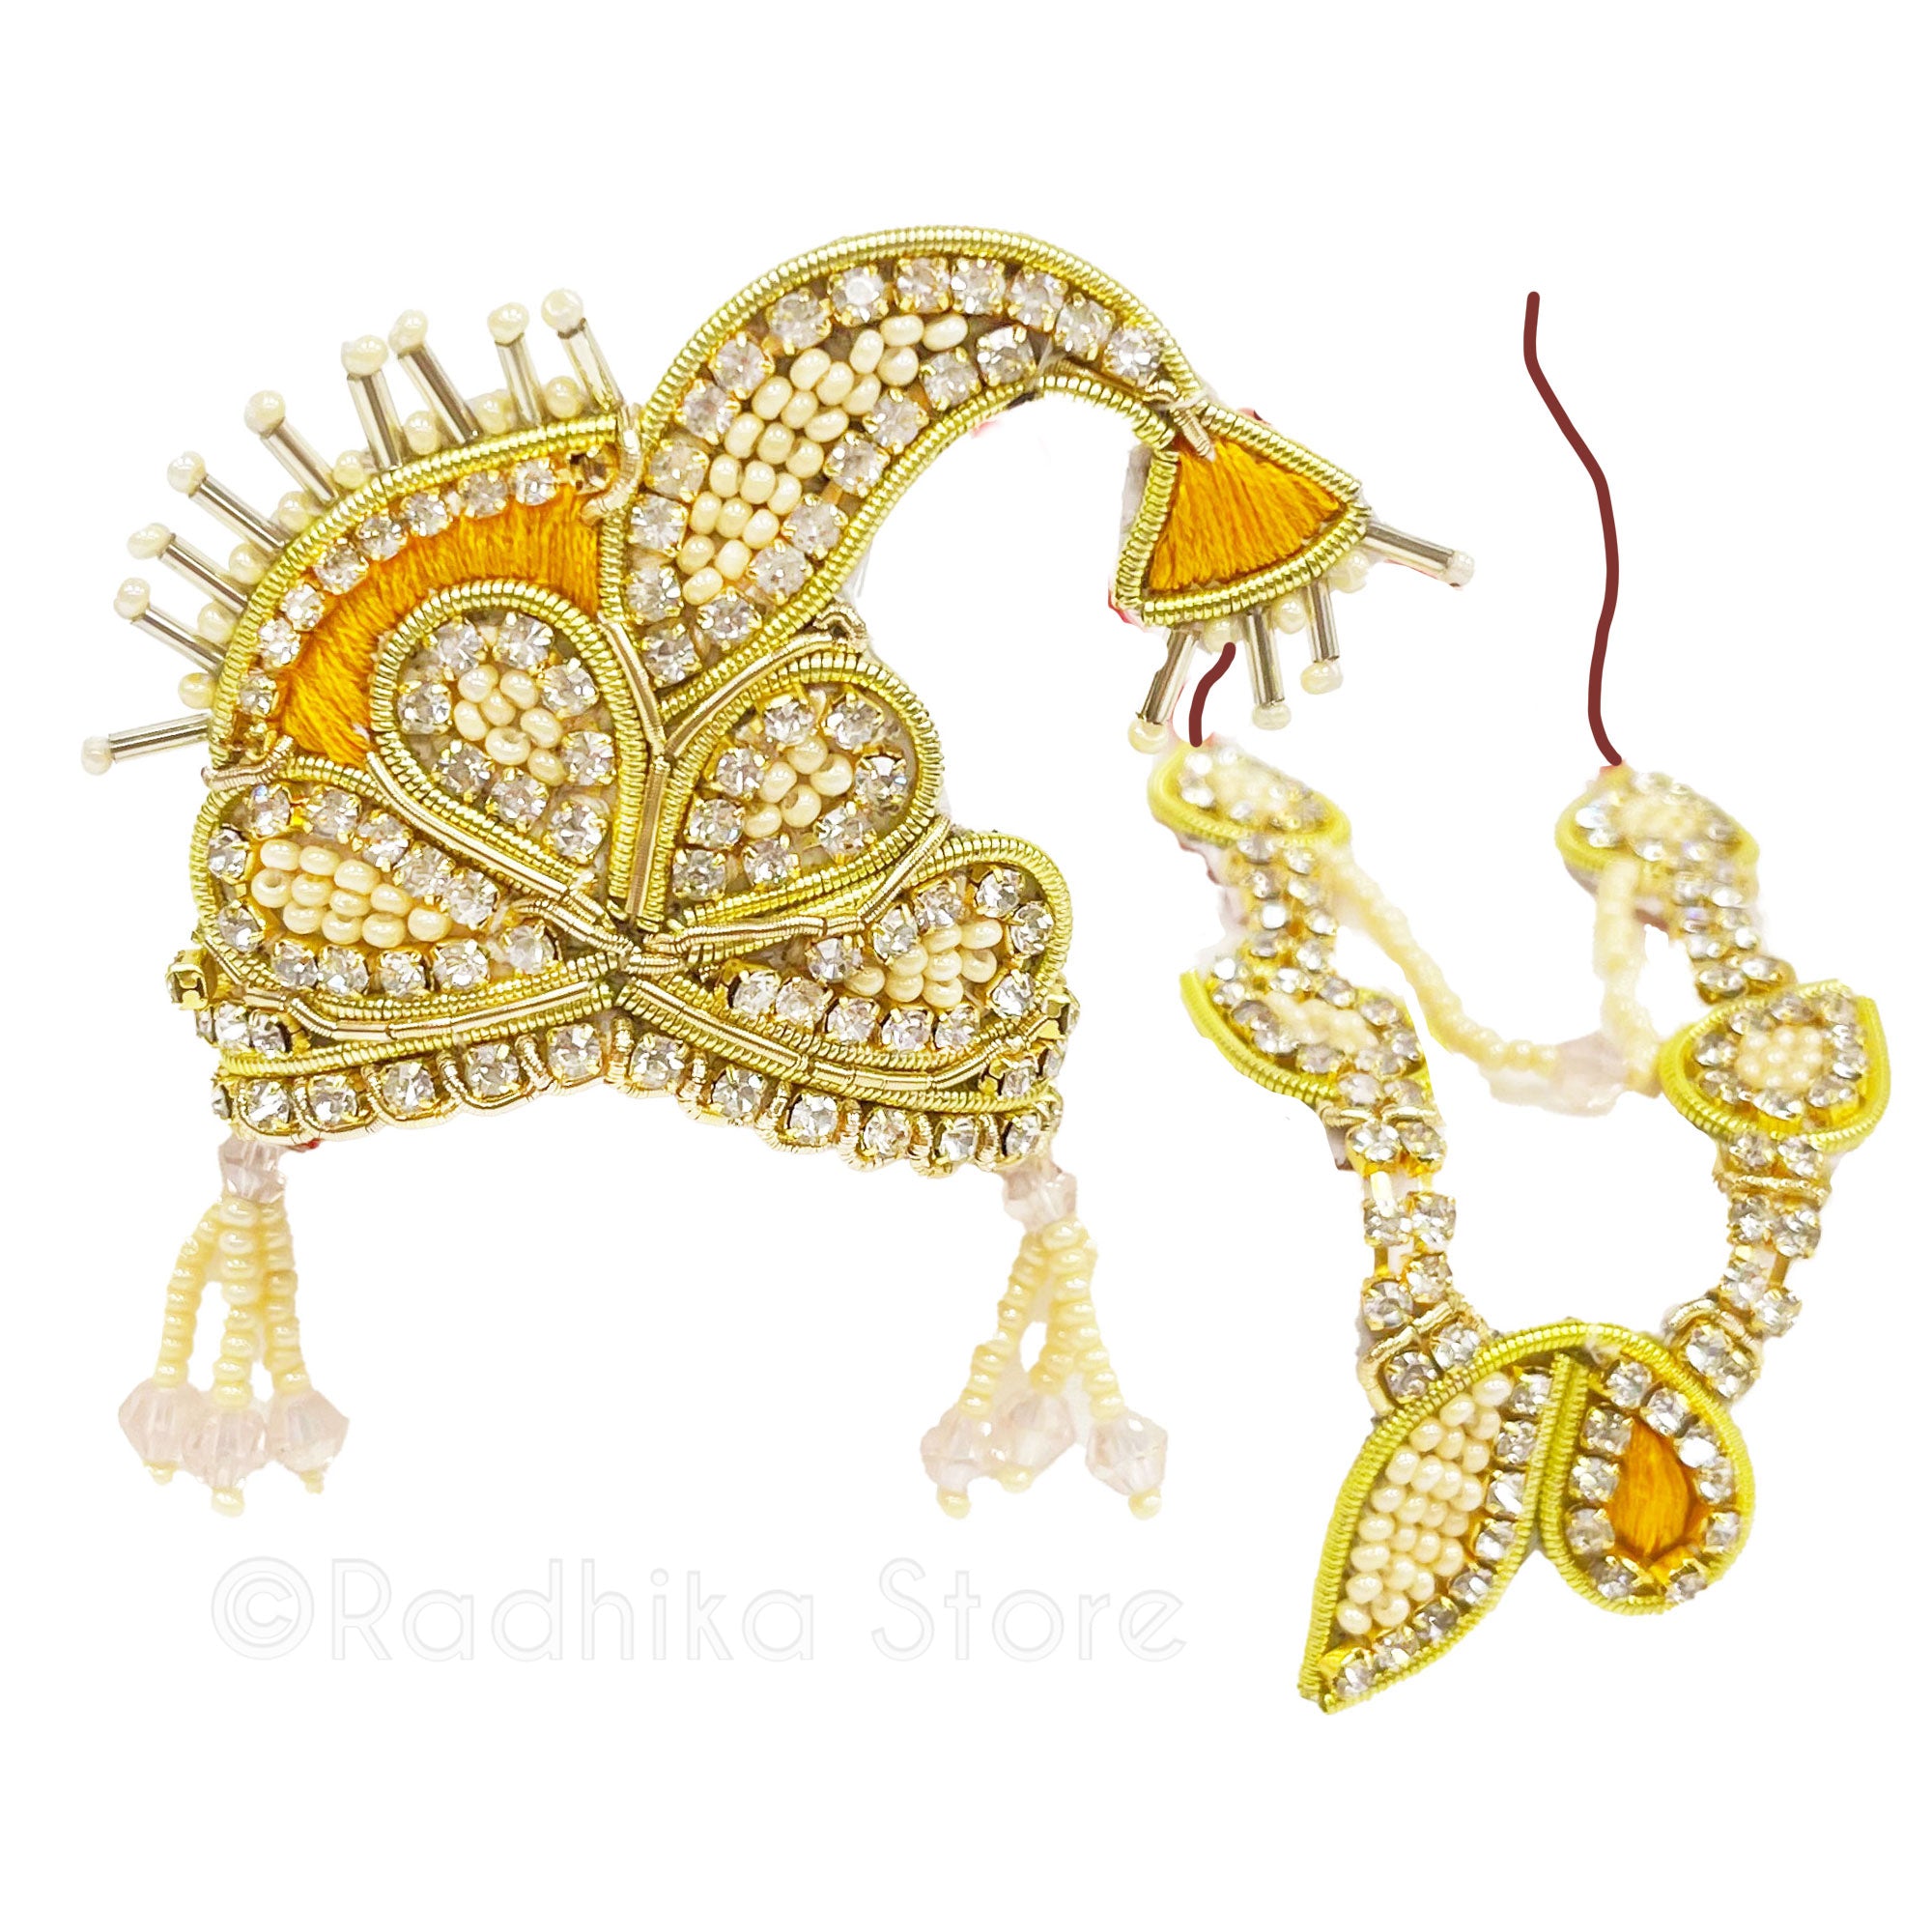 Krishna is the Sun - Deity Crown and Necklace Set